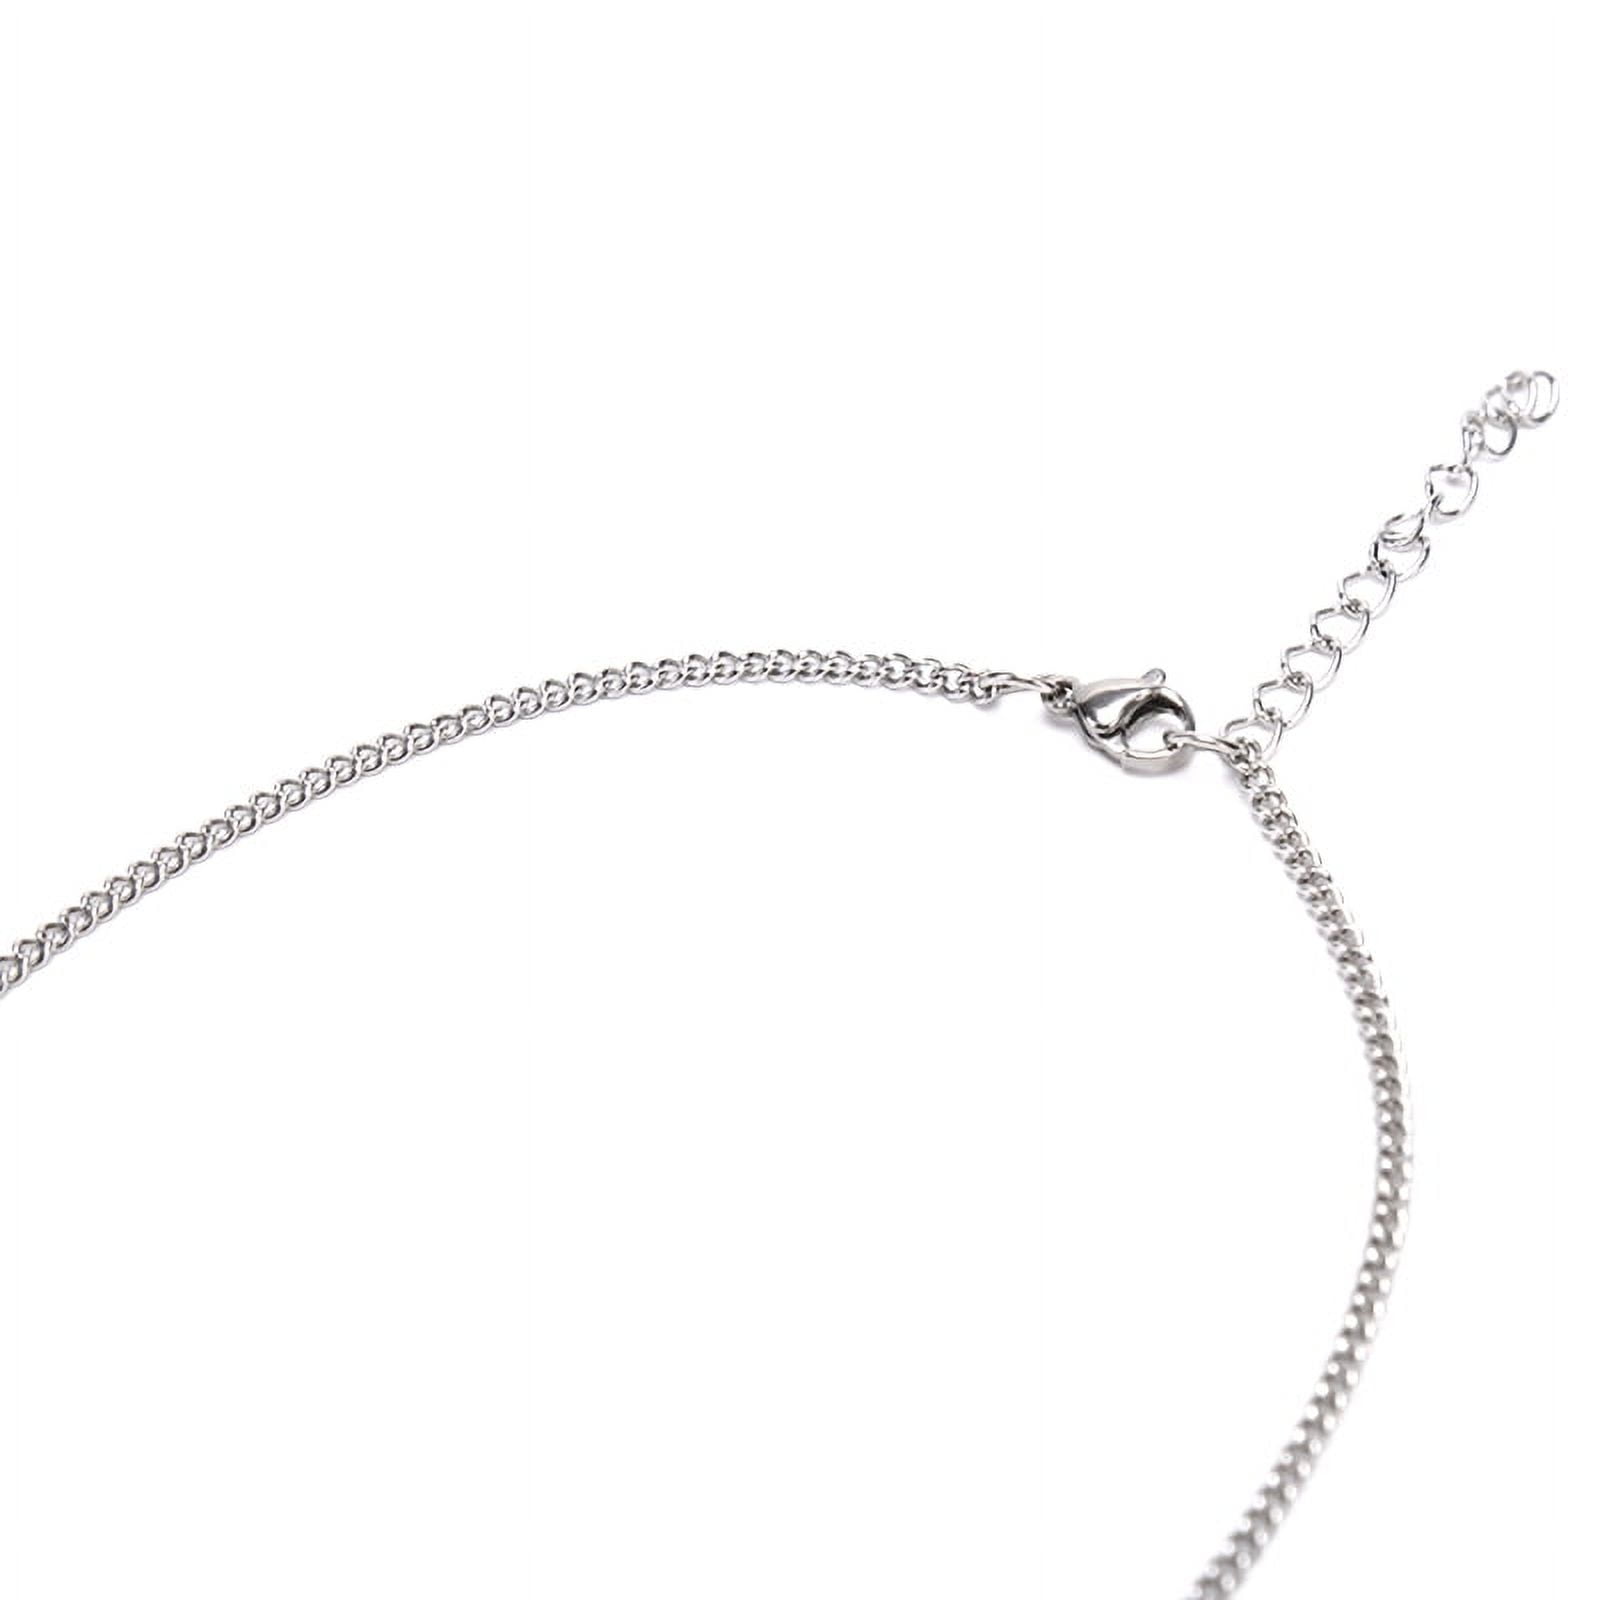  Nanafast Chain Lock Necklace Stainless Steel Statement Long Padlock  Pendant Necklace for Women Girls Silver 18 Inches : Clothing, Shoes &  Jewelry